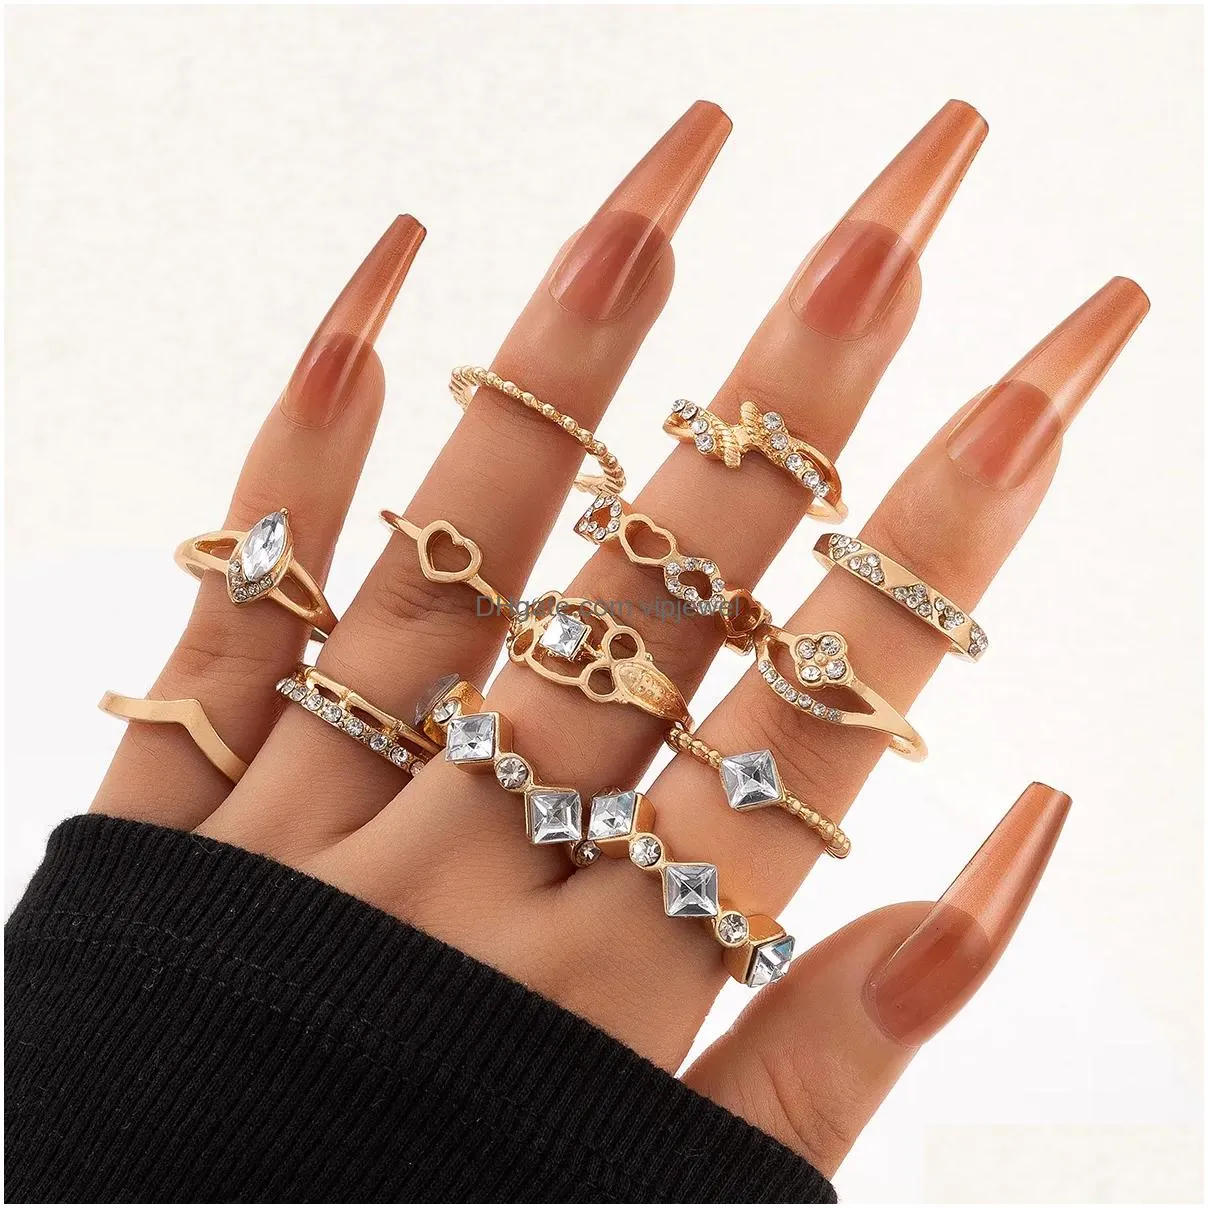 band rings tocona boho 17pcs sets luxury clear crystal stone wedding ring for women men water drop flowers sun geoemtric jewelry